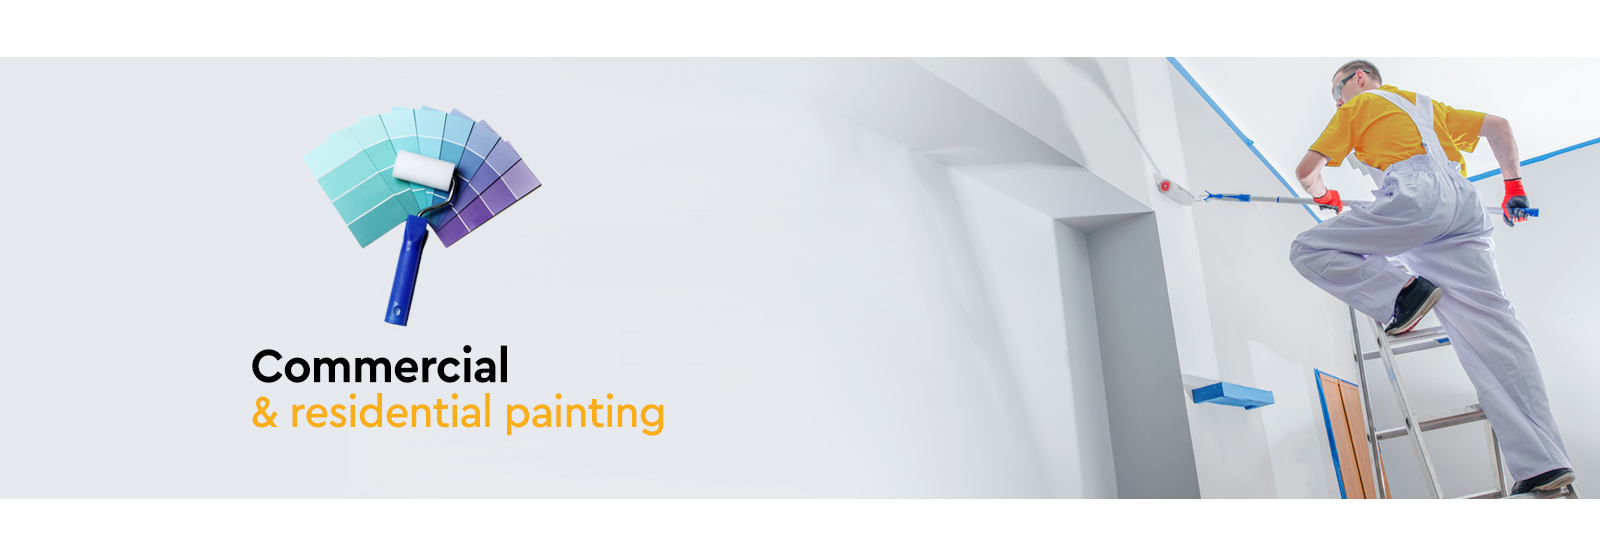 painting service - SS Home Care Services